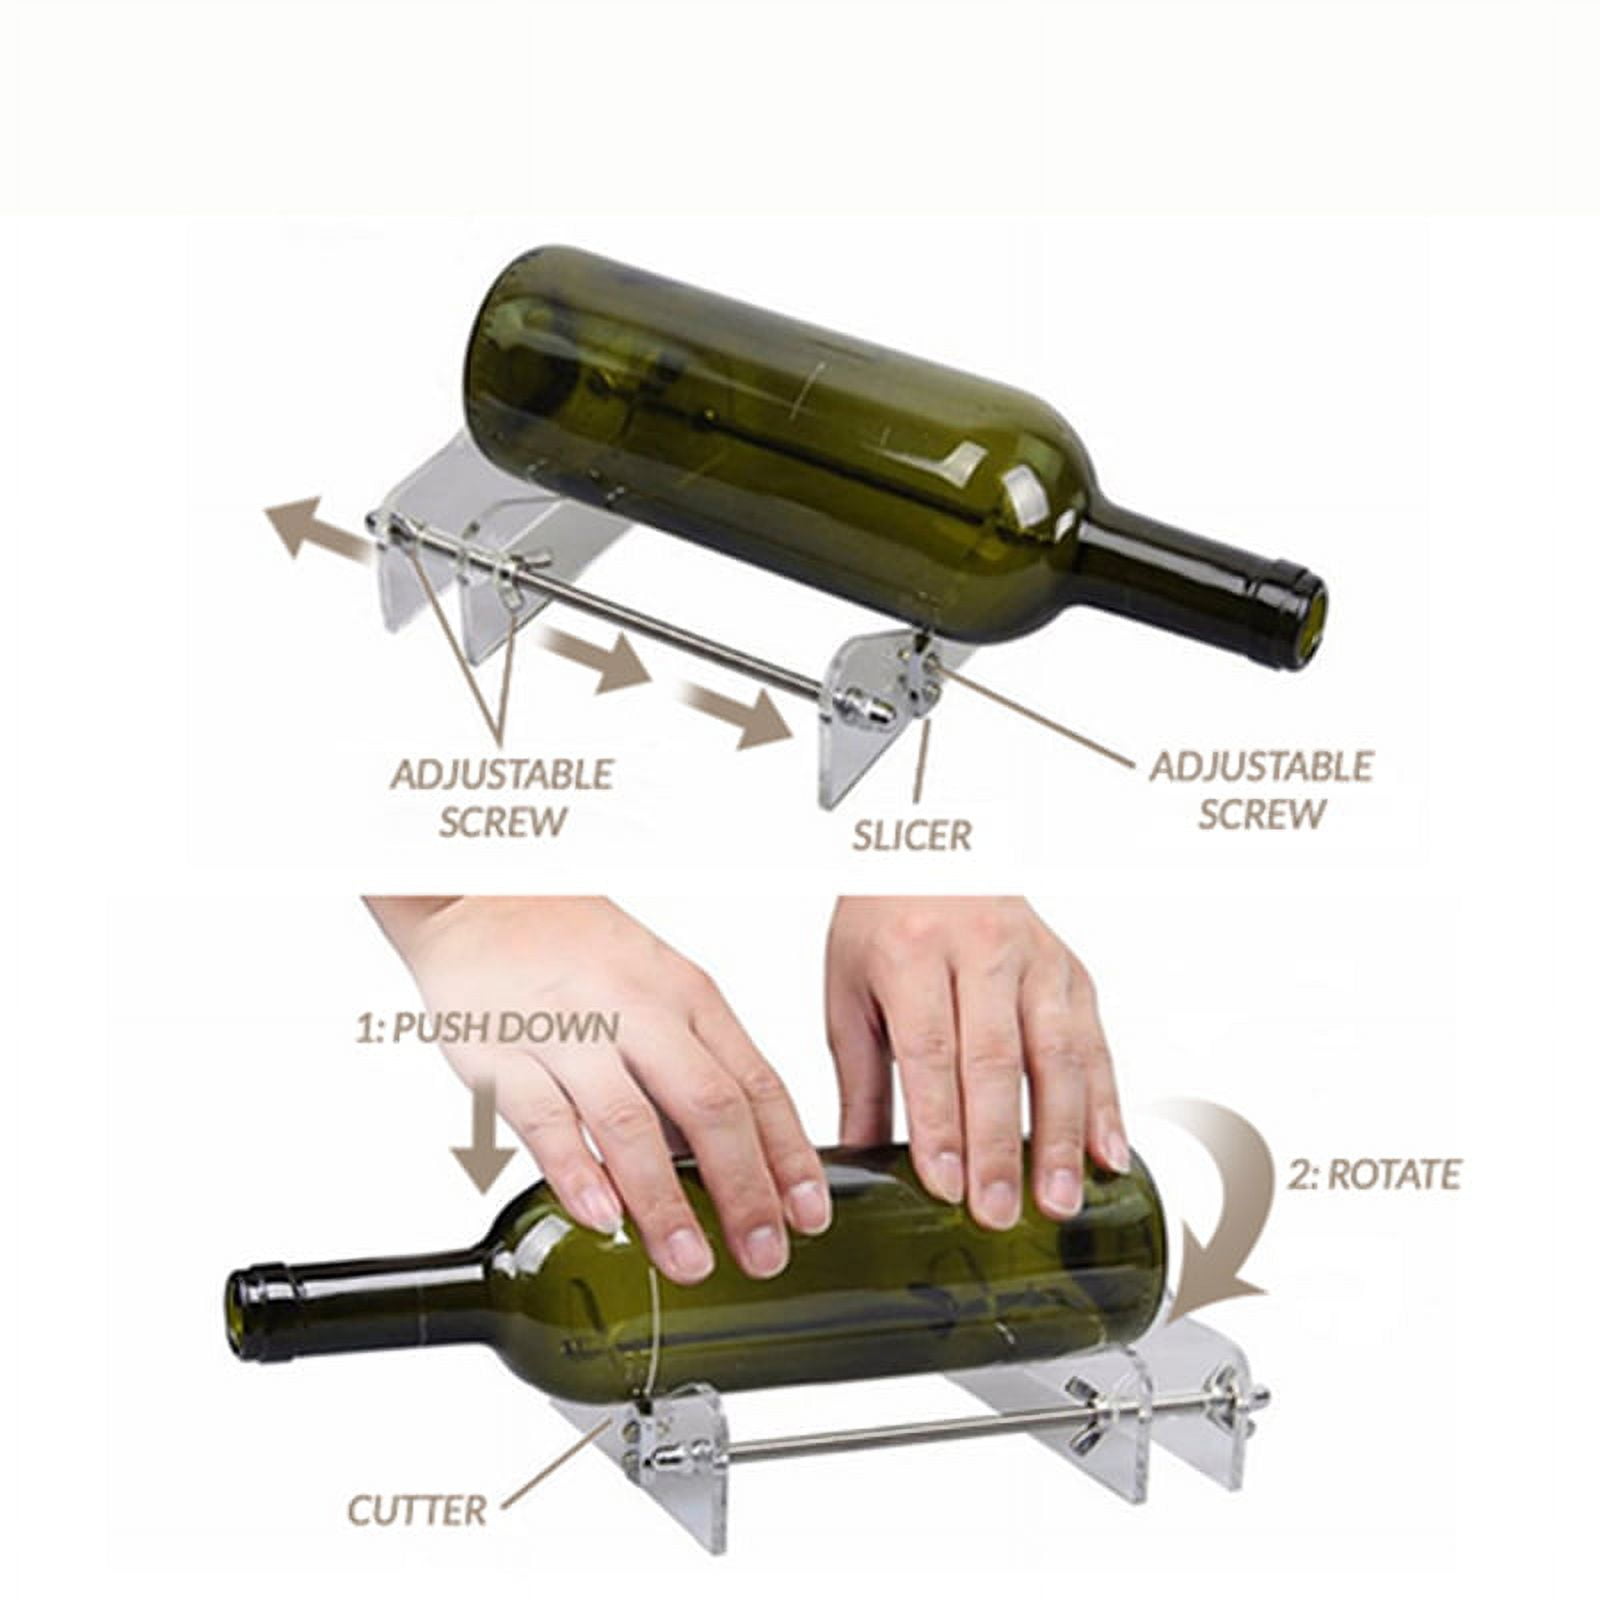 How to Easily Cut Glass Bottles  Cutting glass bottles, Glass bottles, Cut  glass